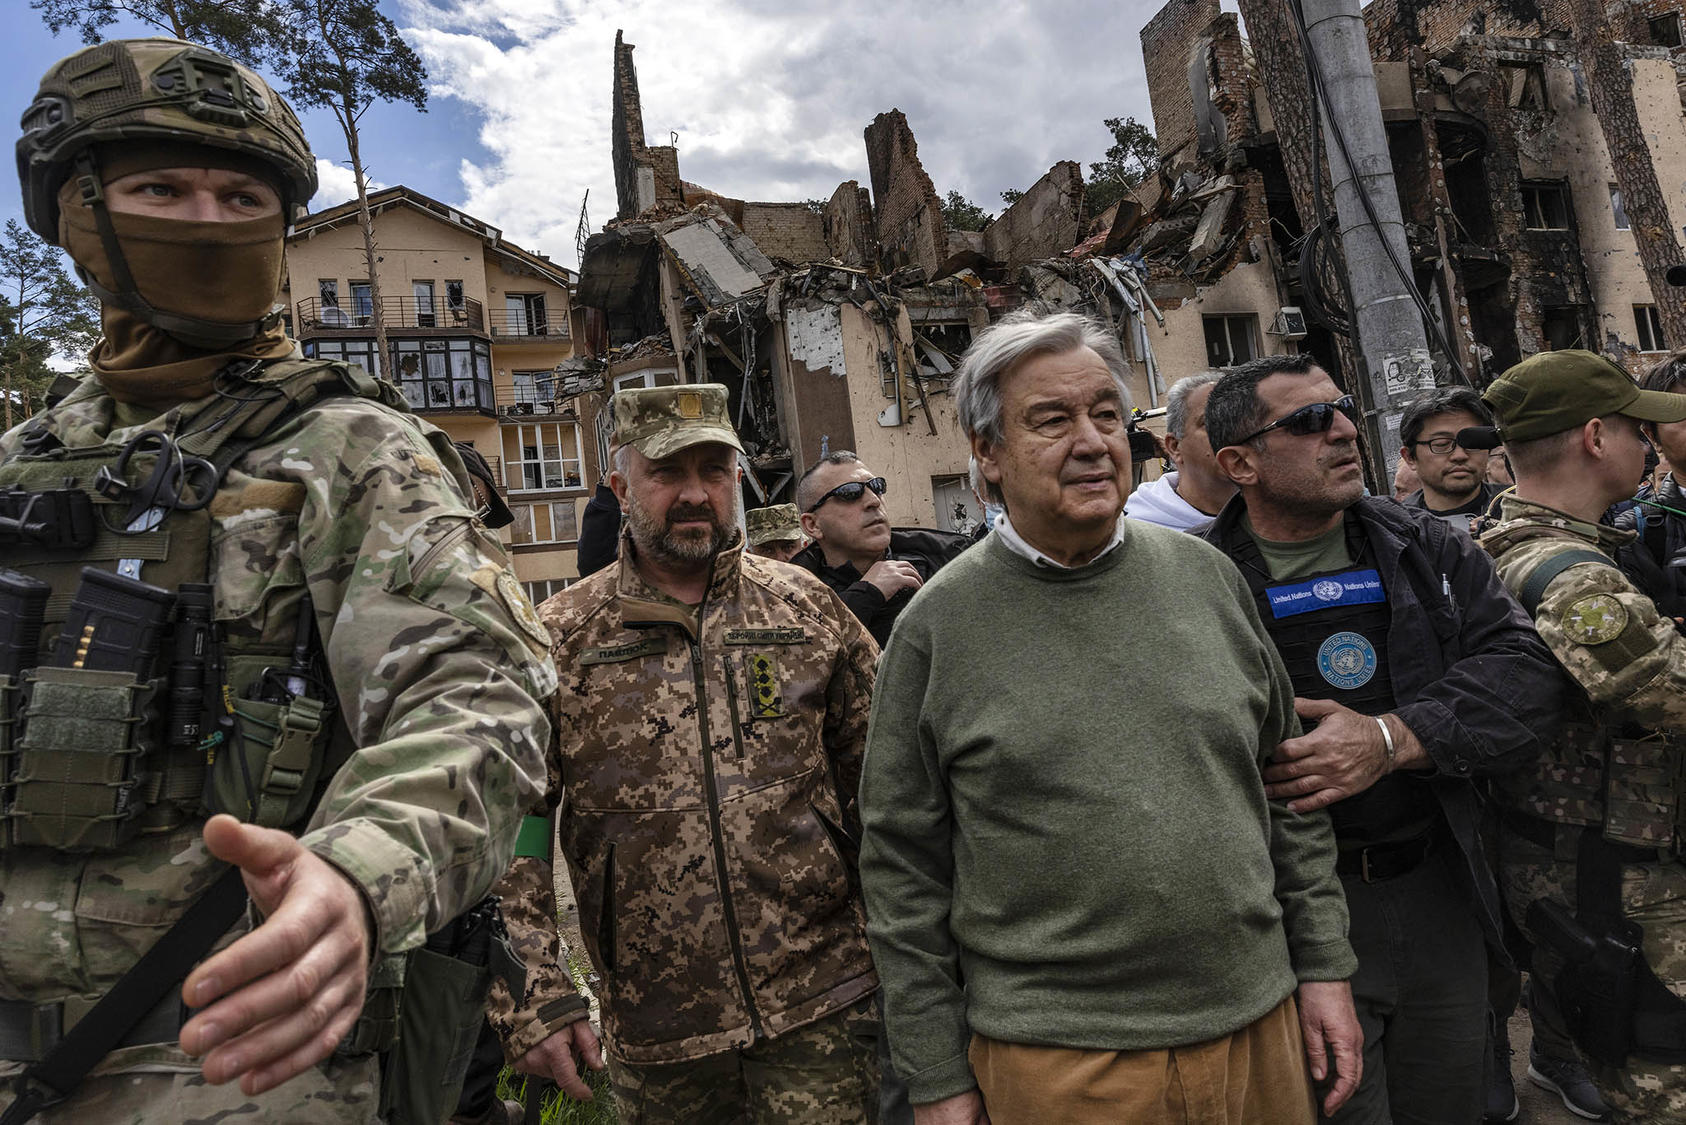 Antonio Guterres, the U.N. secretary general, visits a destroyed area of the city of Irpin, Ukraine, April 28, 2022. (David Guttenfelder/The New York Times)